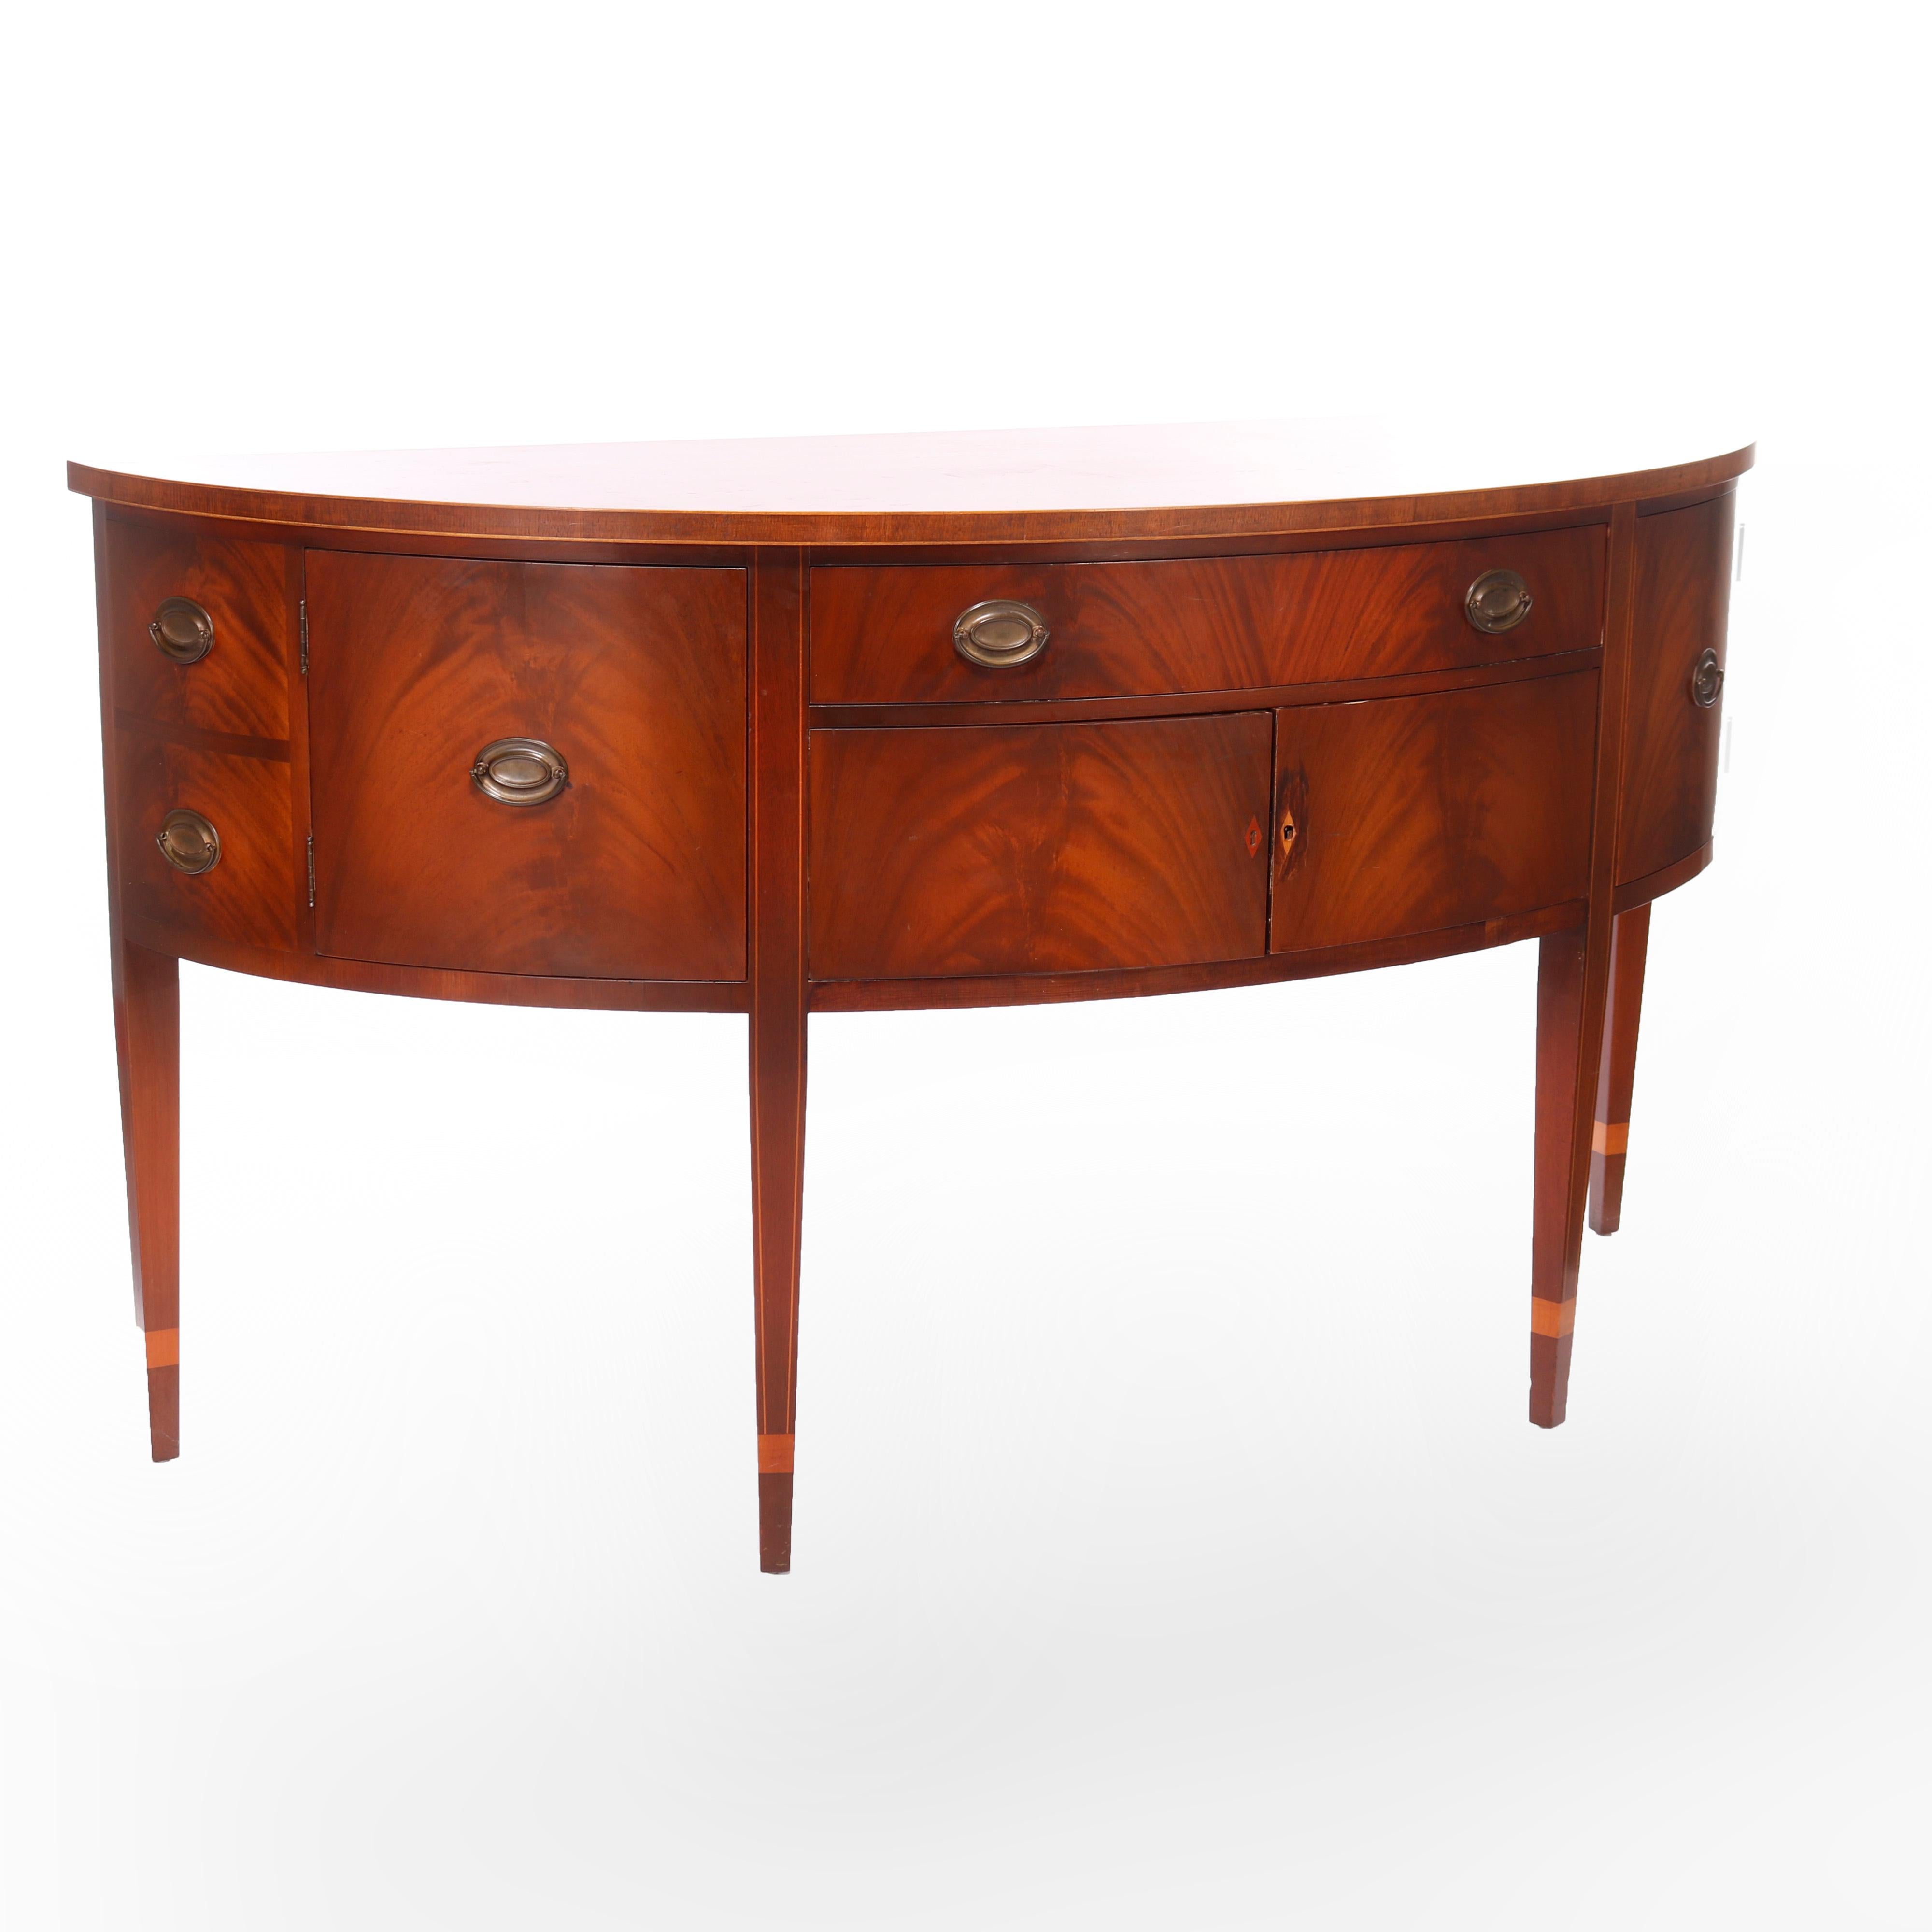 American Antique Hepplewhite Style Kittinger Flame Mahogany Demilune Sideboard c1930 For Sale